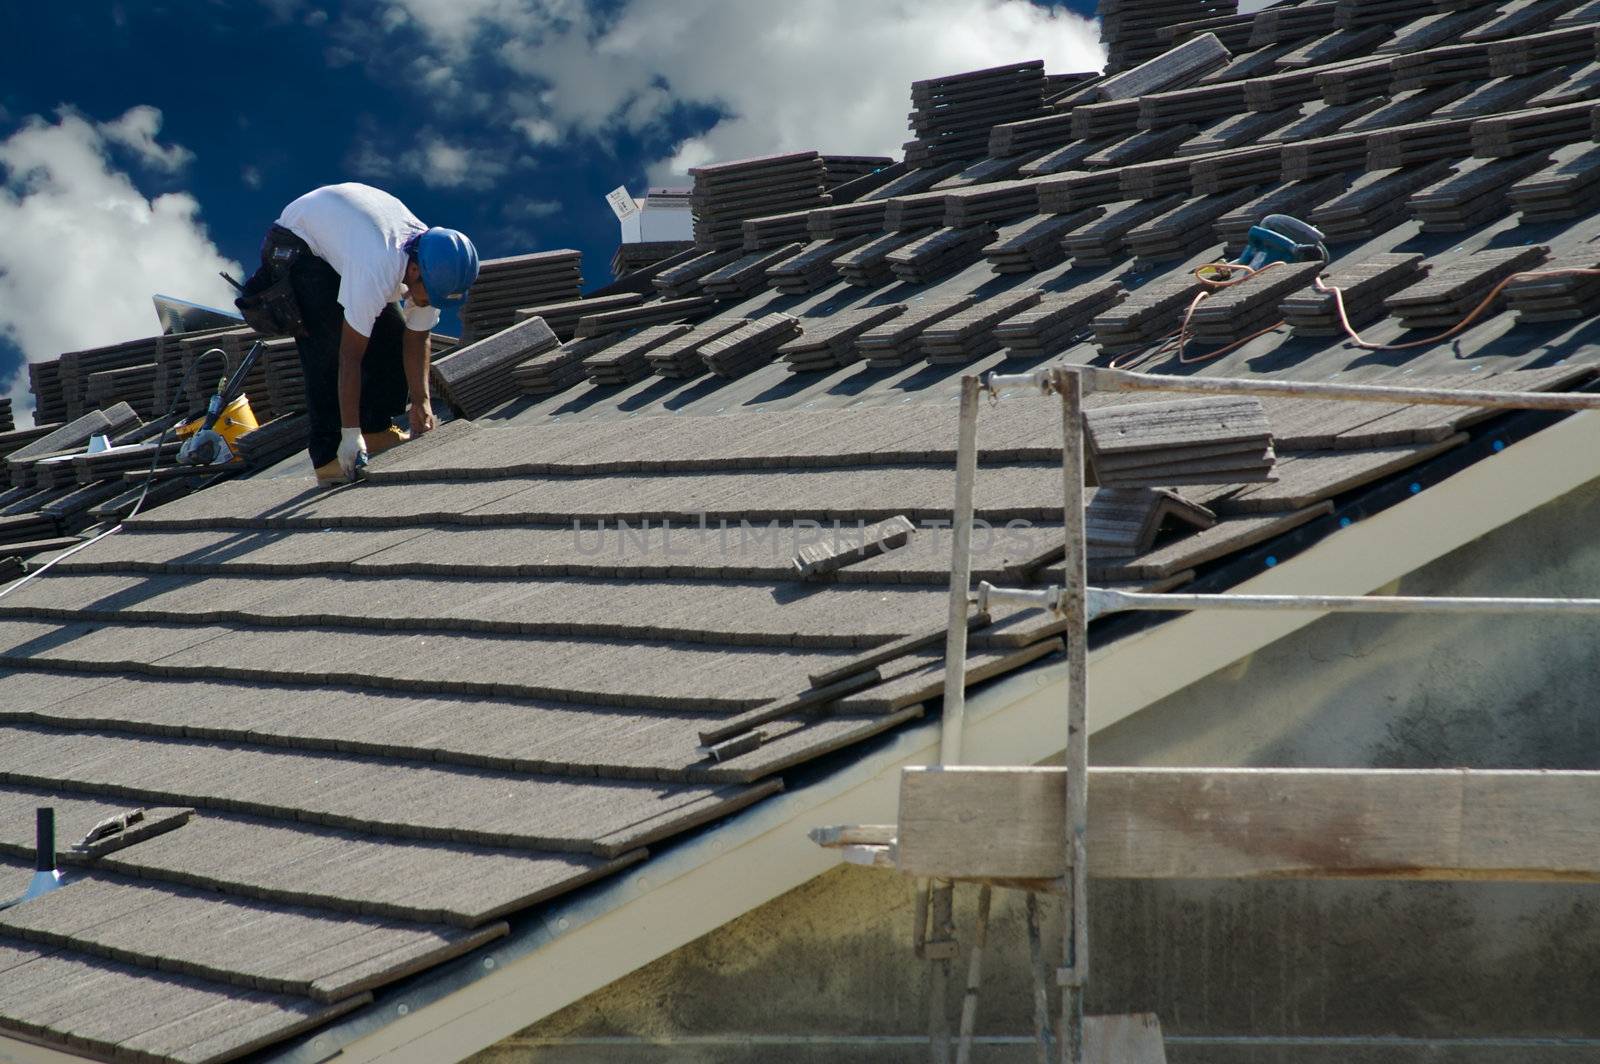 Roofer Laying Tile by Feverpitched